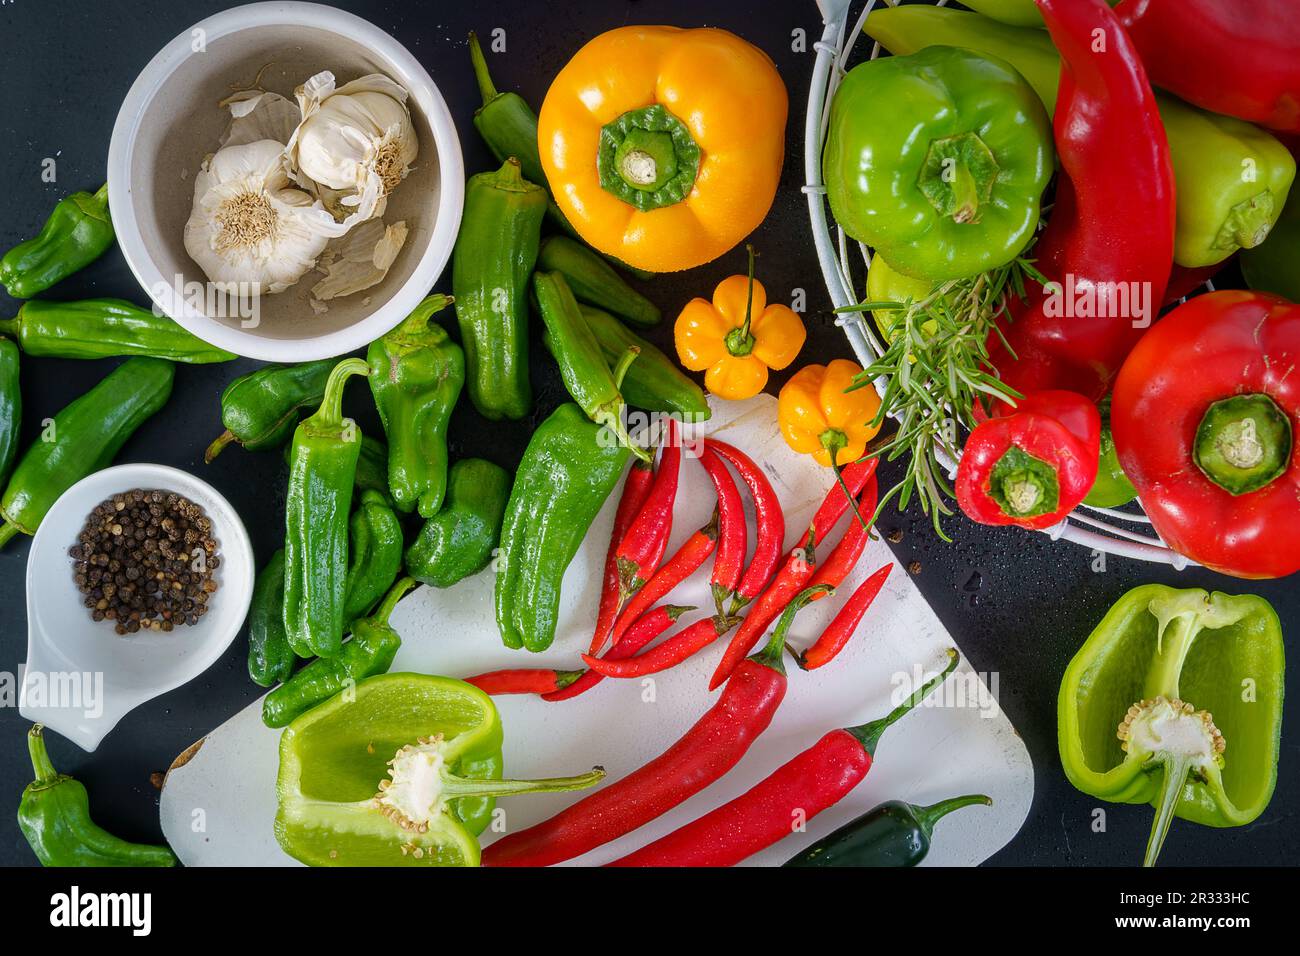 a colorful assortment of peppers, hot peppers and chili, decorated with various assesoires on a wooden table. Stock Photo